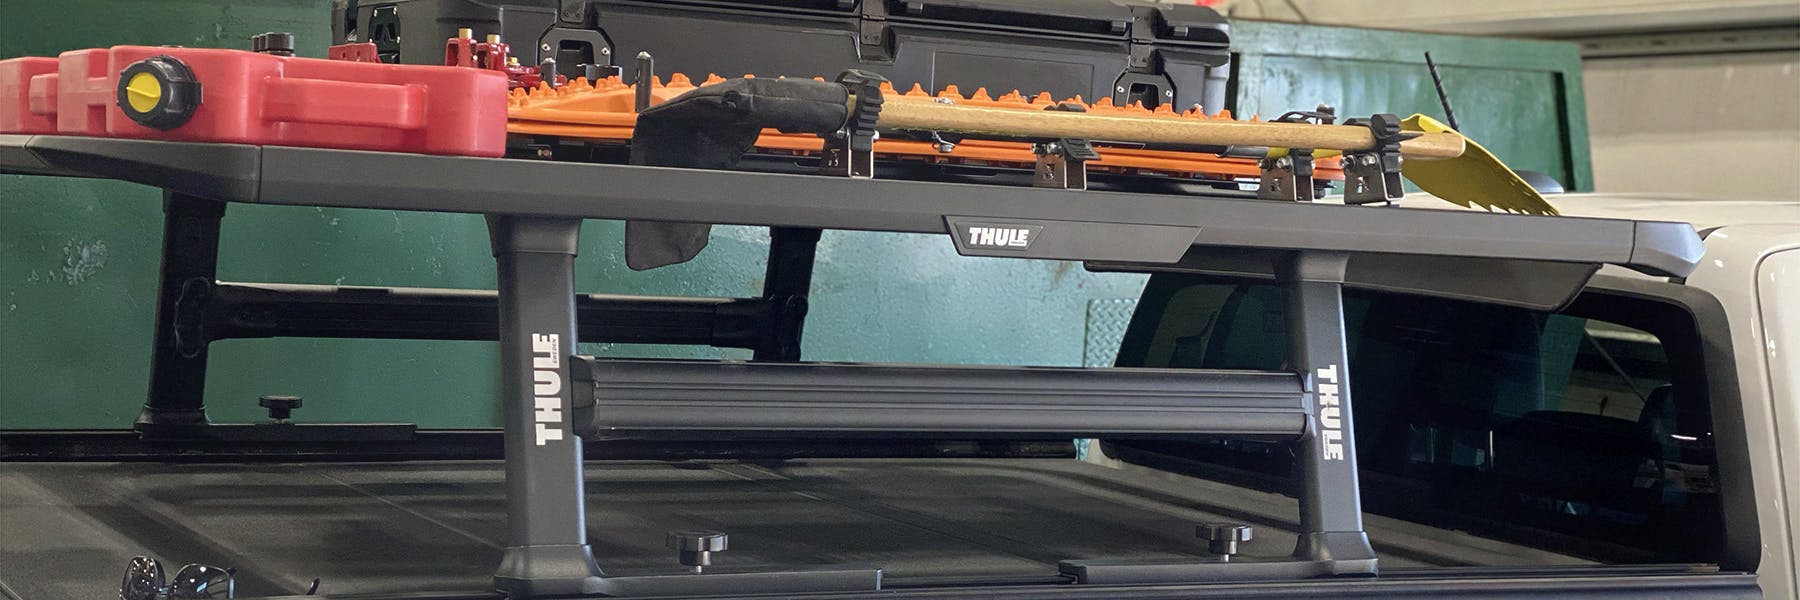 Thule Truck Bed Cargo Carriers